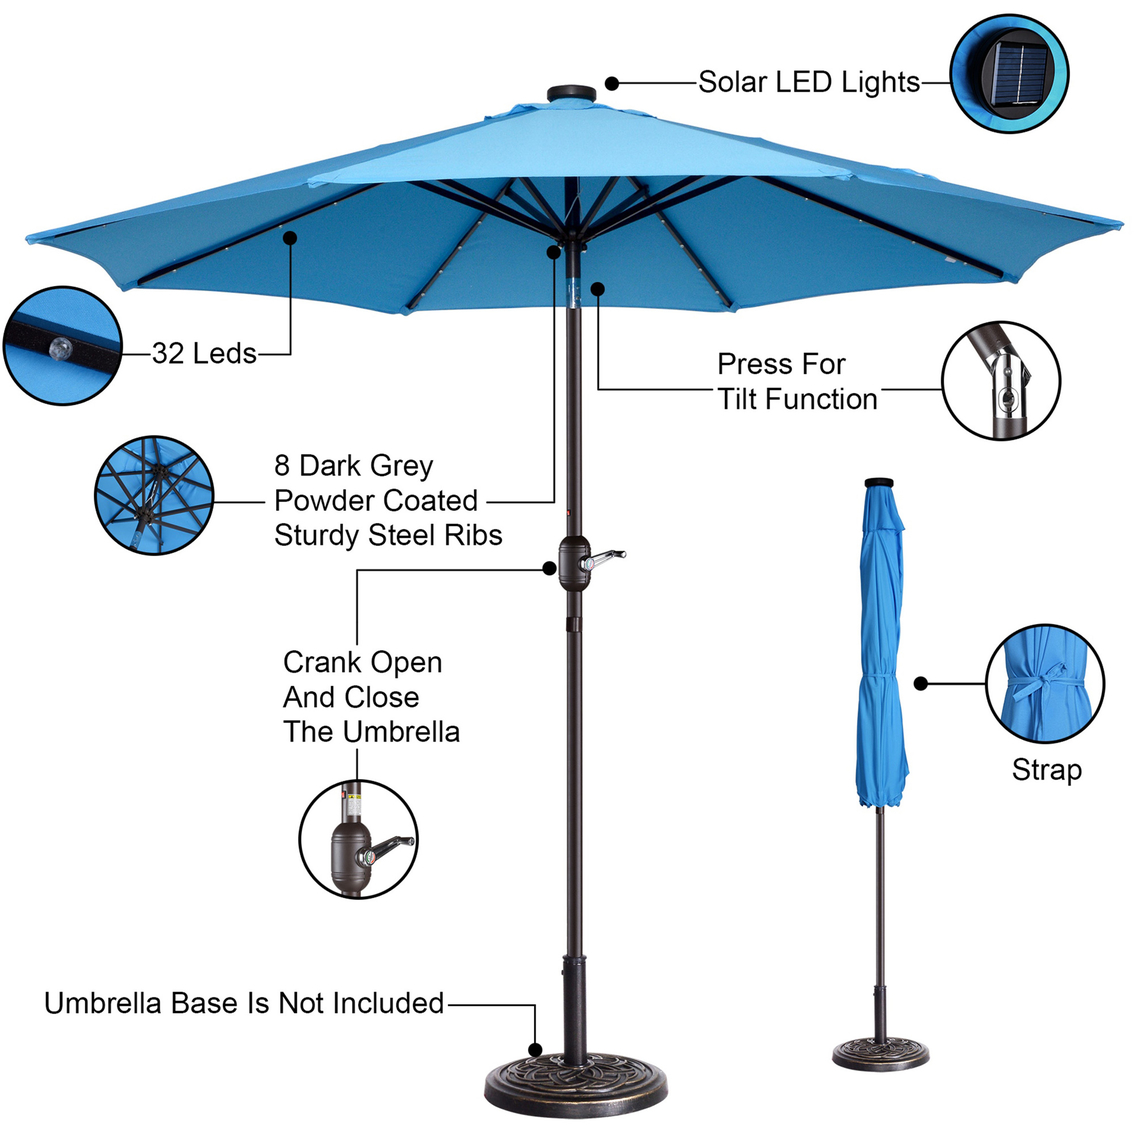 Pure Garden 9 ft. Solar Powered LED Lighted Patio Umbrella with Push Button Tilt - Image 3 of 8